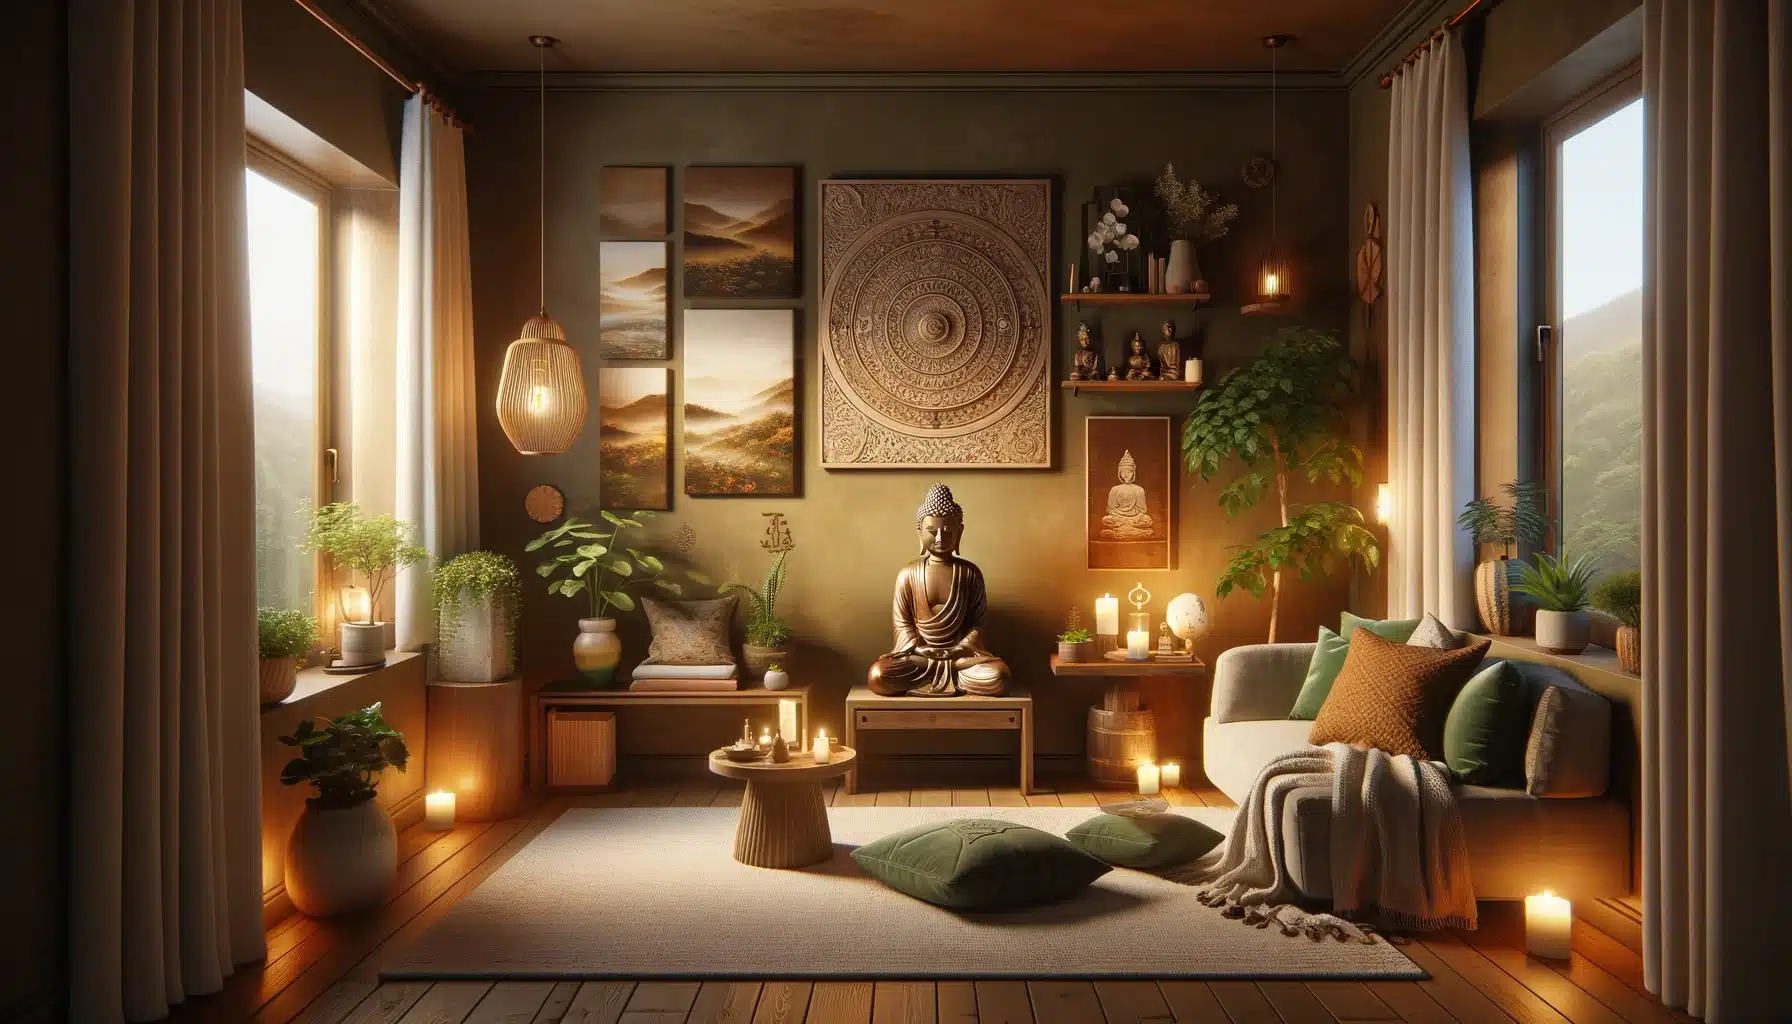 Cozy room with warm ambient lighting, featuring a small wooden Buddha statue on a side table, surrounded by candles and potted plants. Buddha-themed artwork decorates the walls, and a comfortable seating area with cushions and blankets invites relaxation.